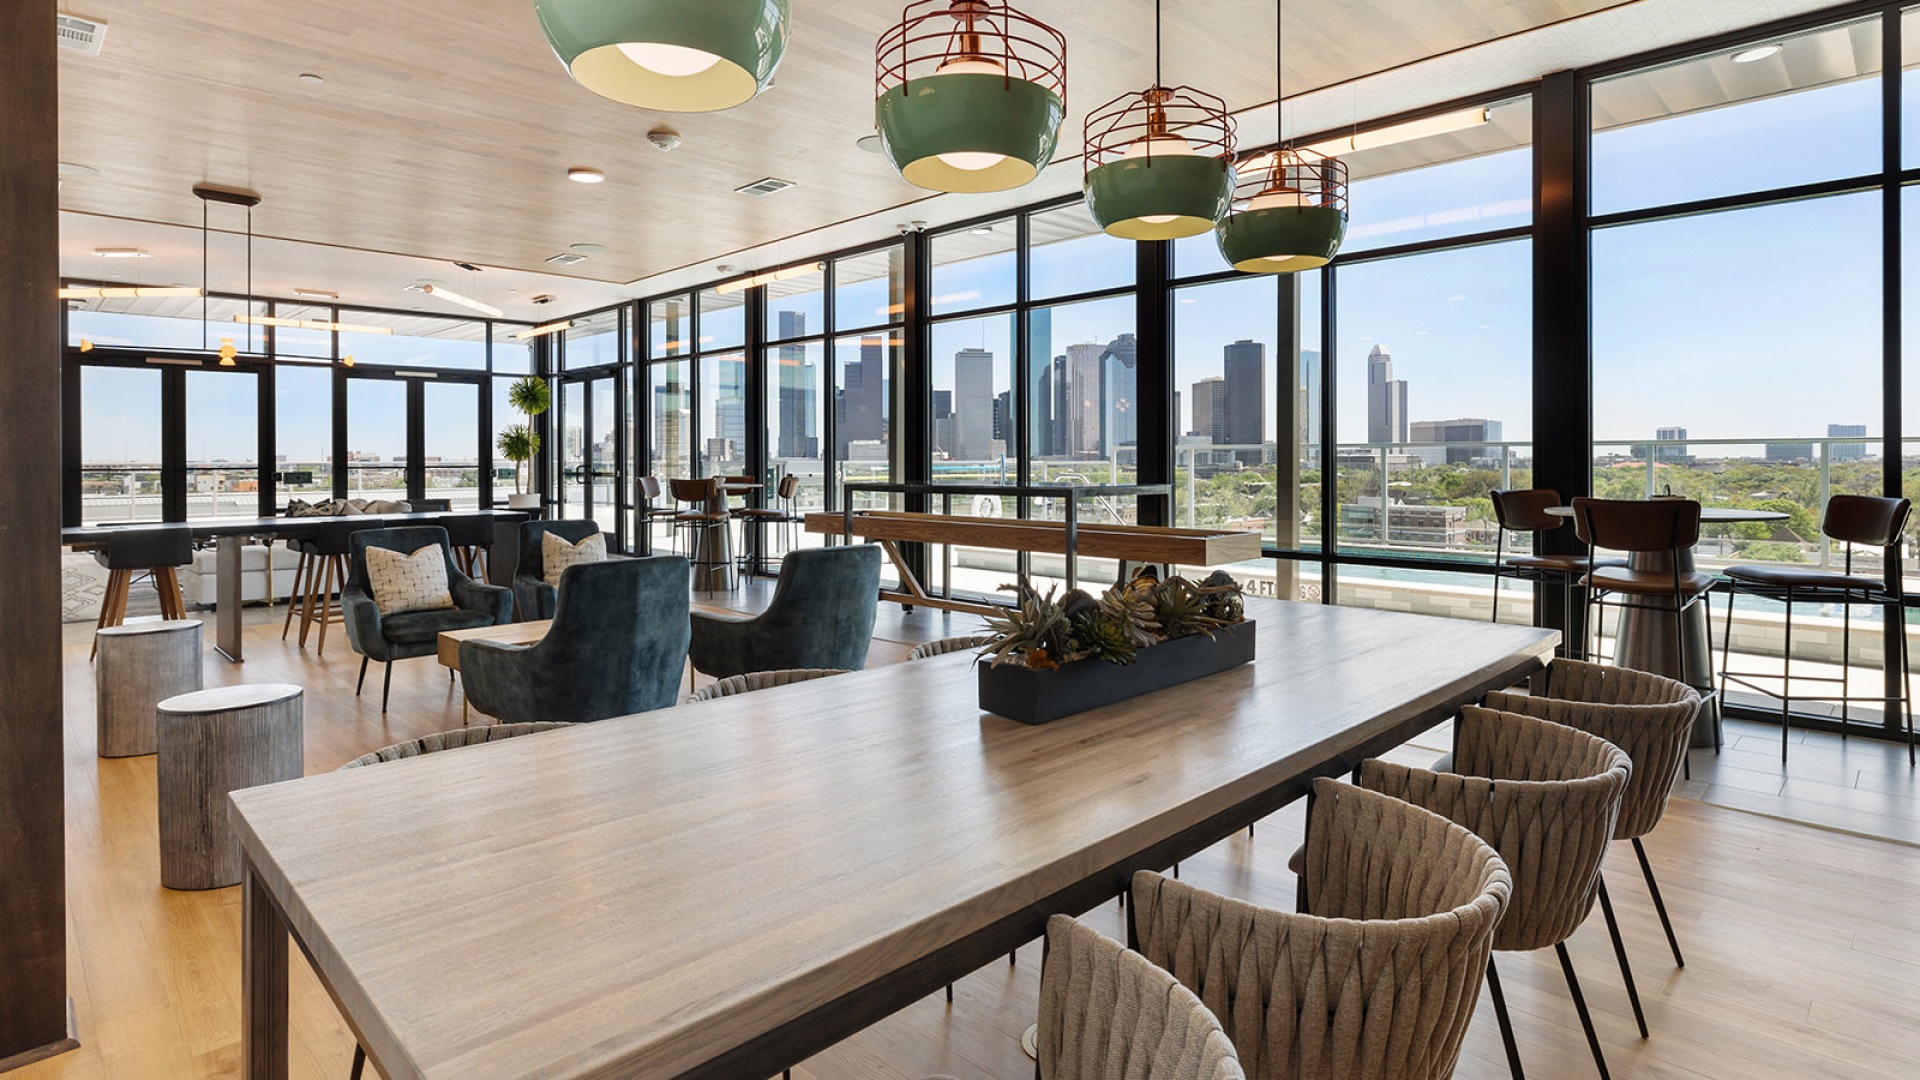 Starry Night Sky Lounge at our apartments in Houston, TX, featuring ample seating and a view of the city skyline.